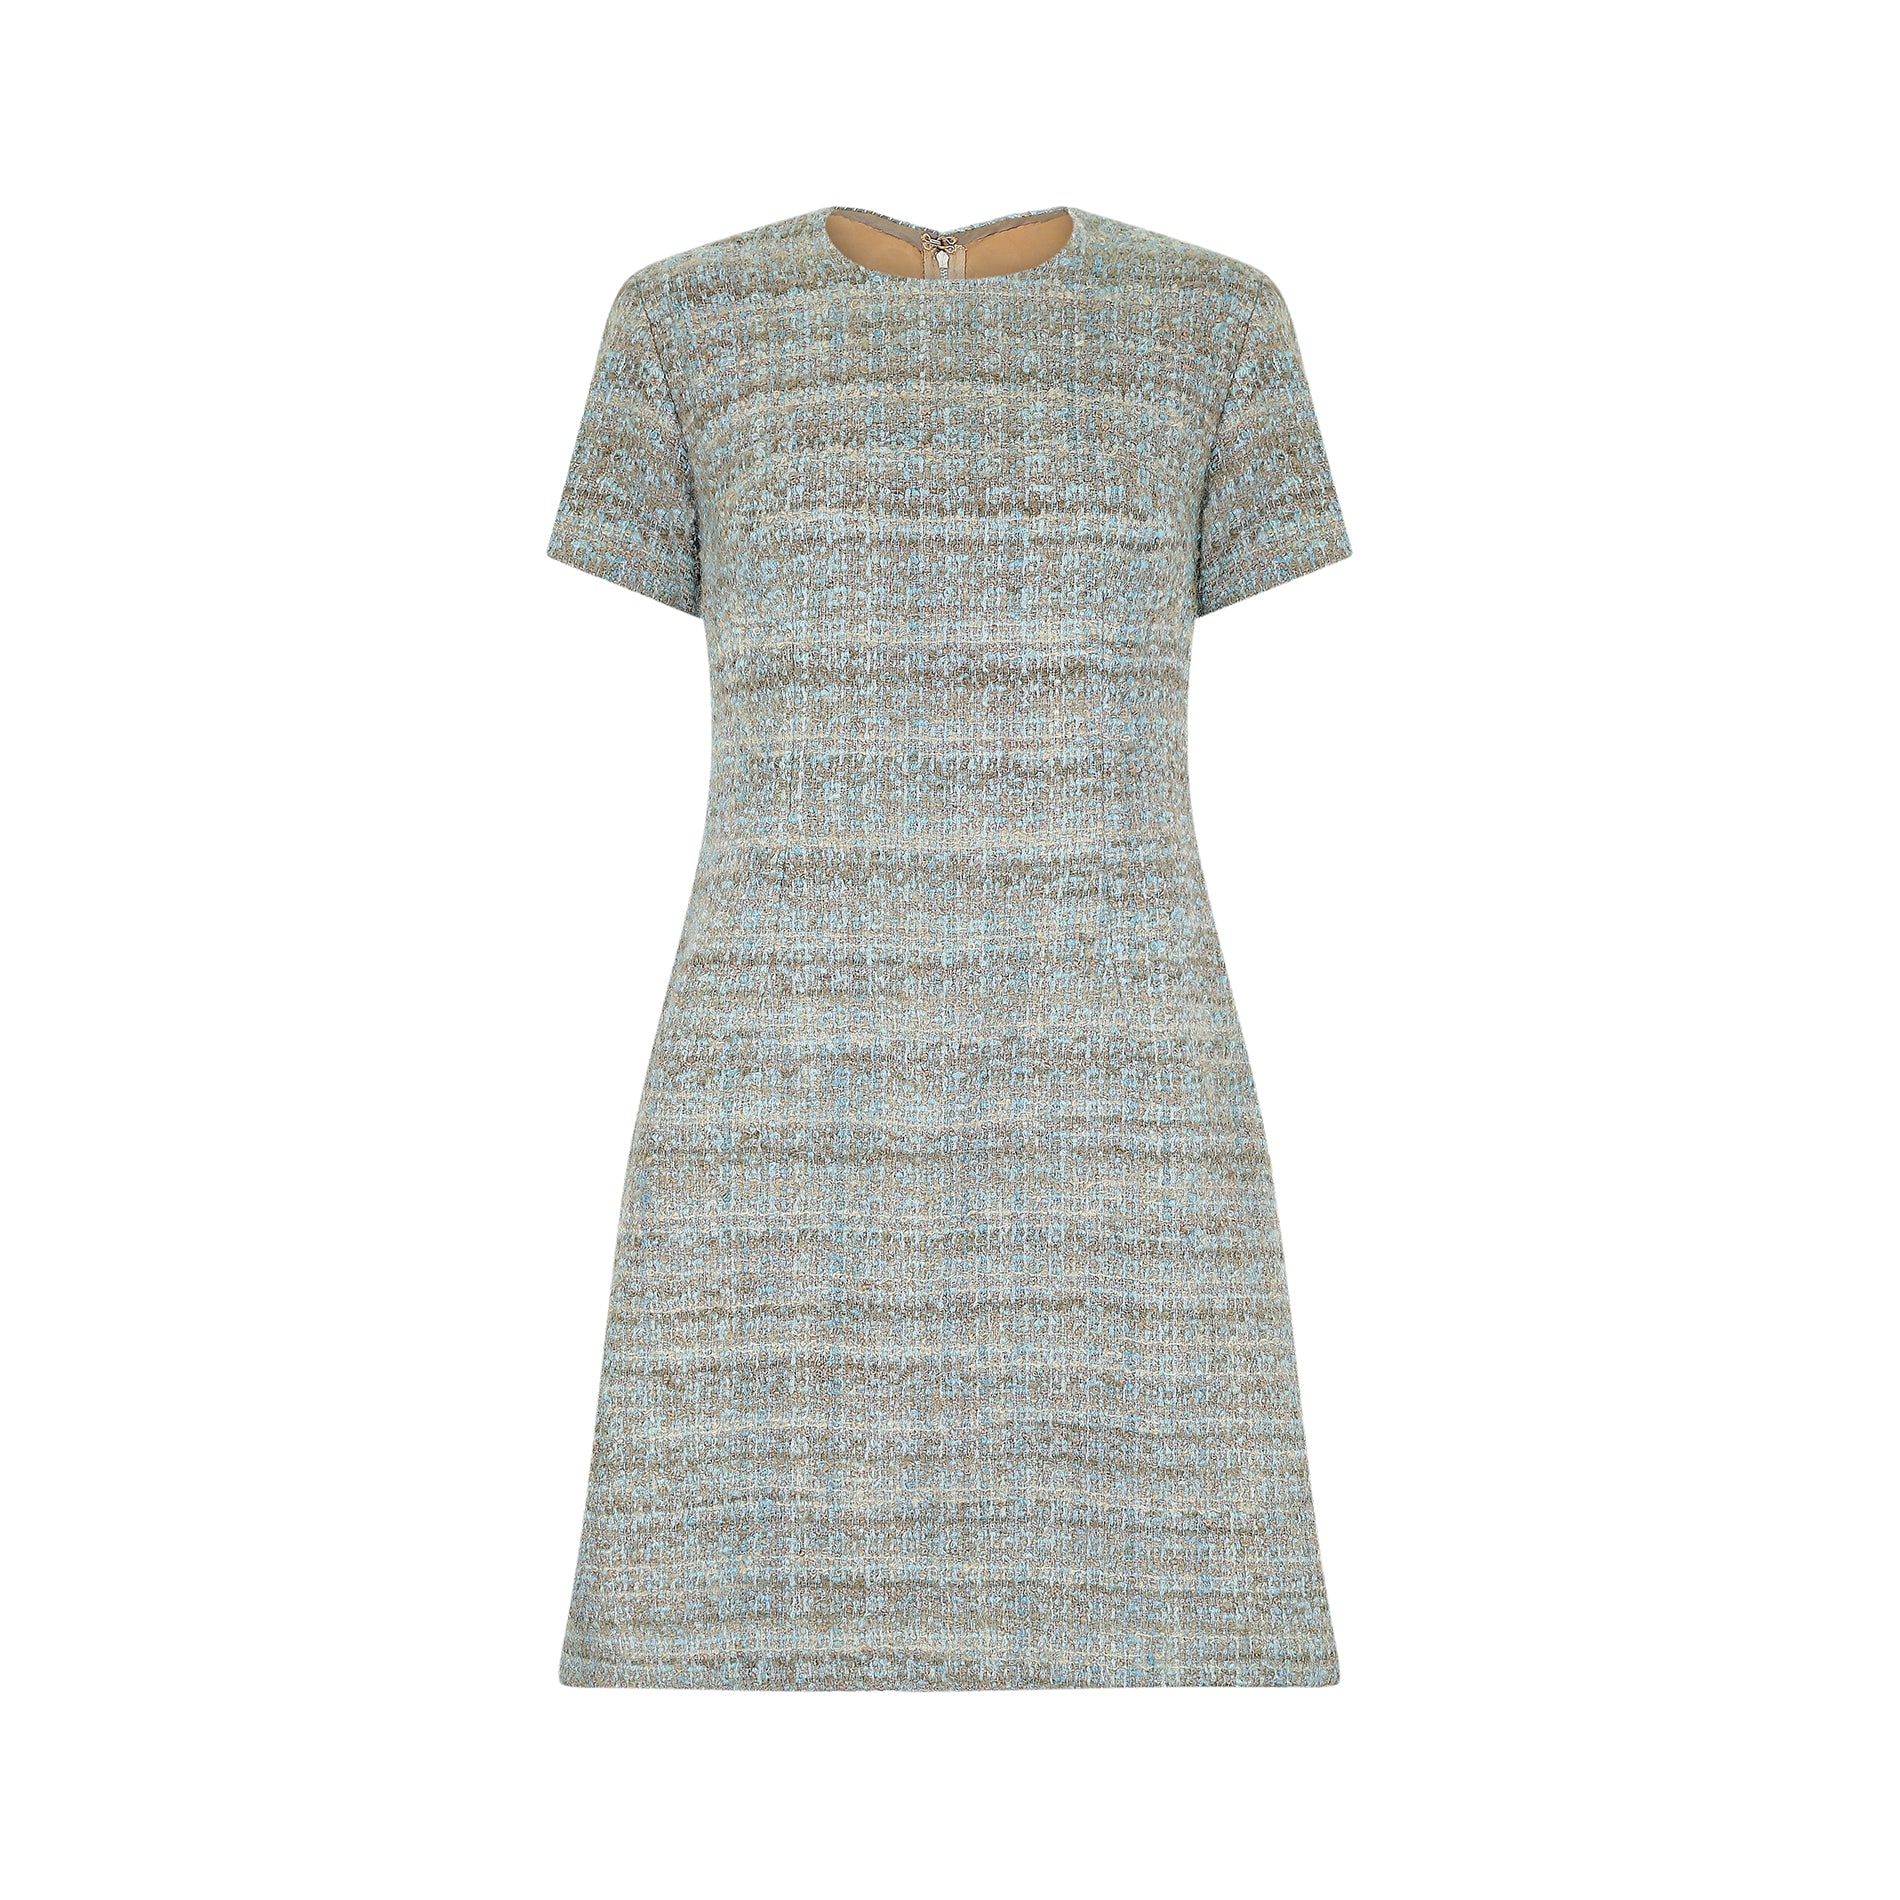 1960s Turquoise and Taupe Boucle Wool Dress